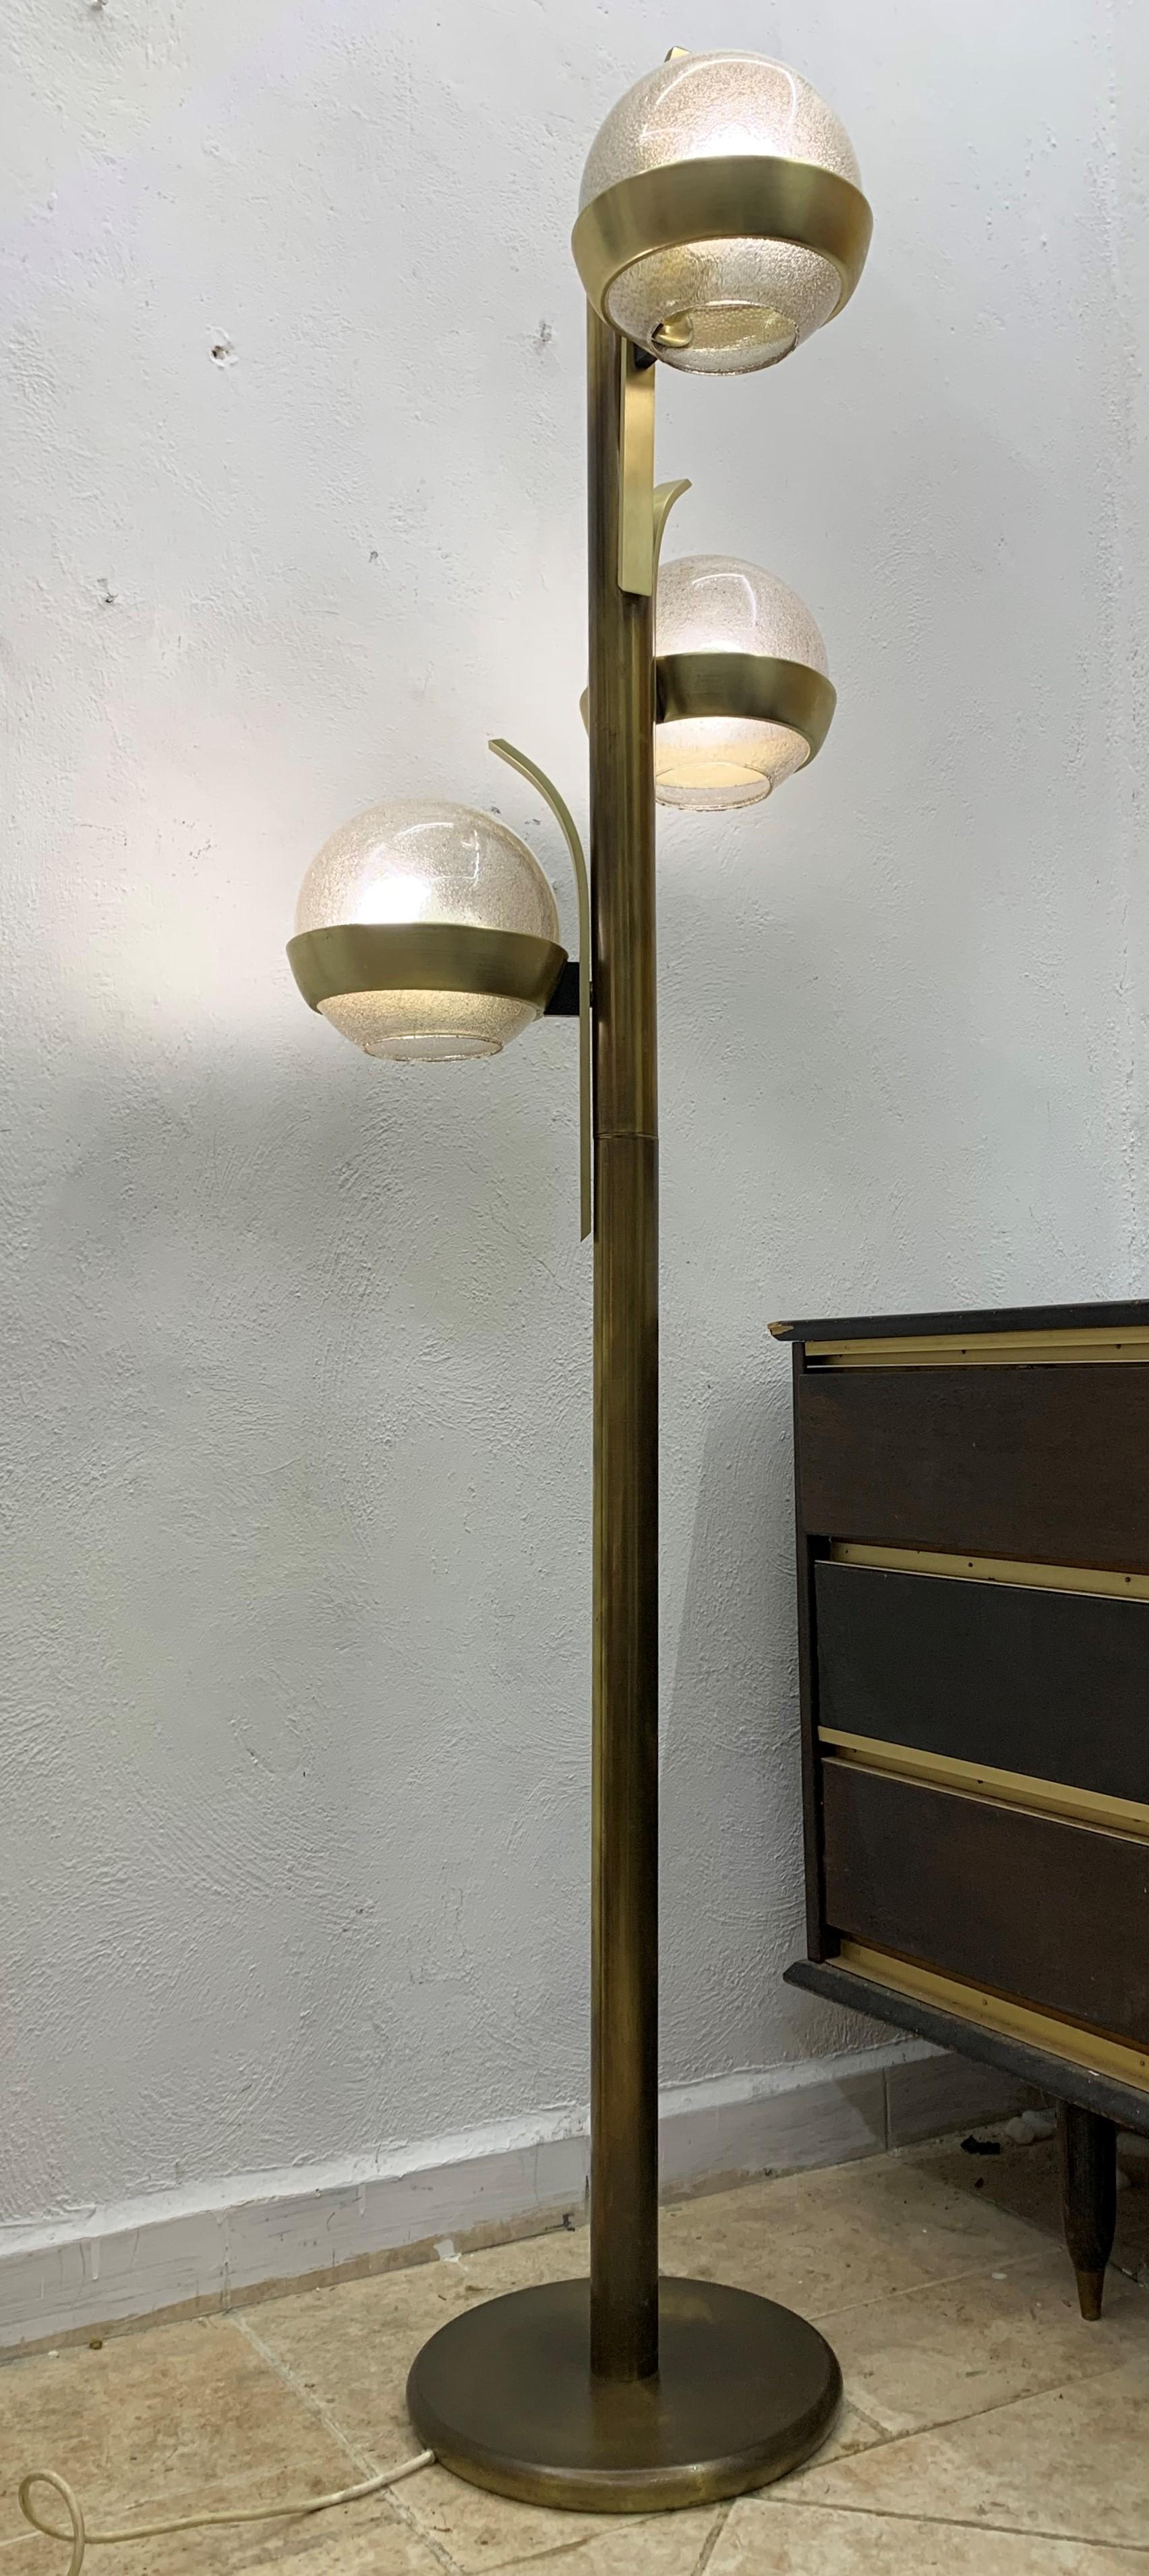 Hand-Crafted Space Age Floor Lamp by Lumi in Brass and Murano Glass, circa 1960s For Sale